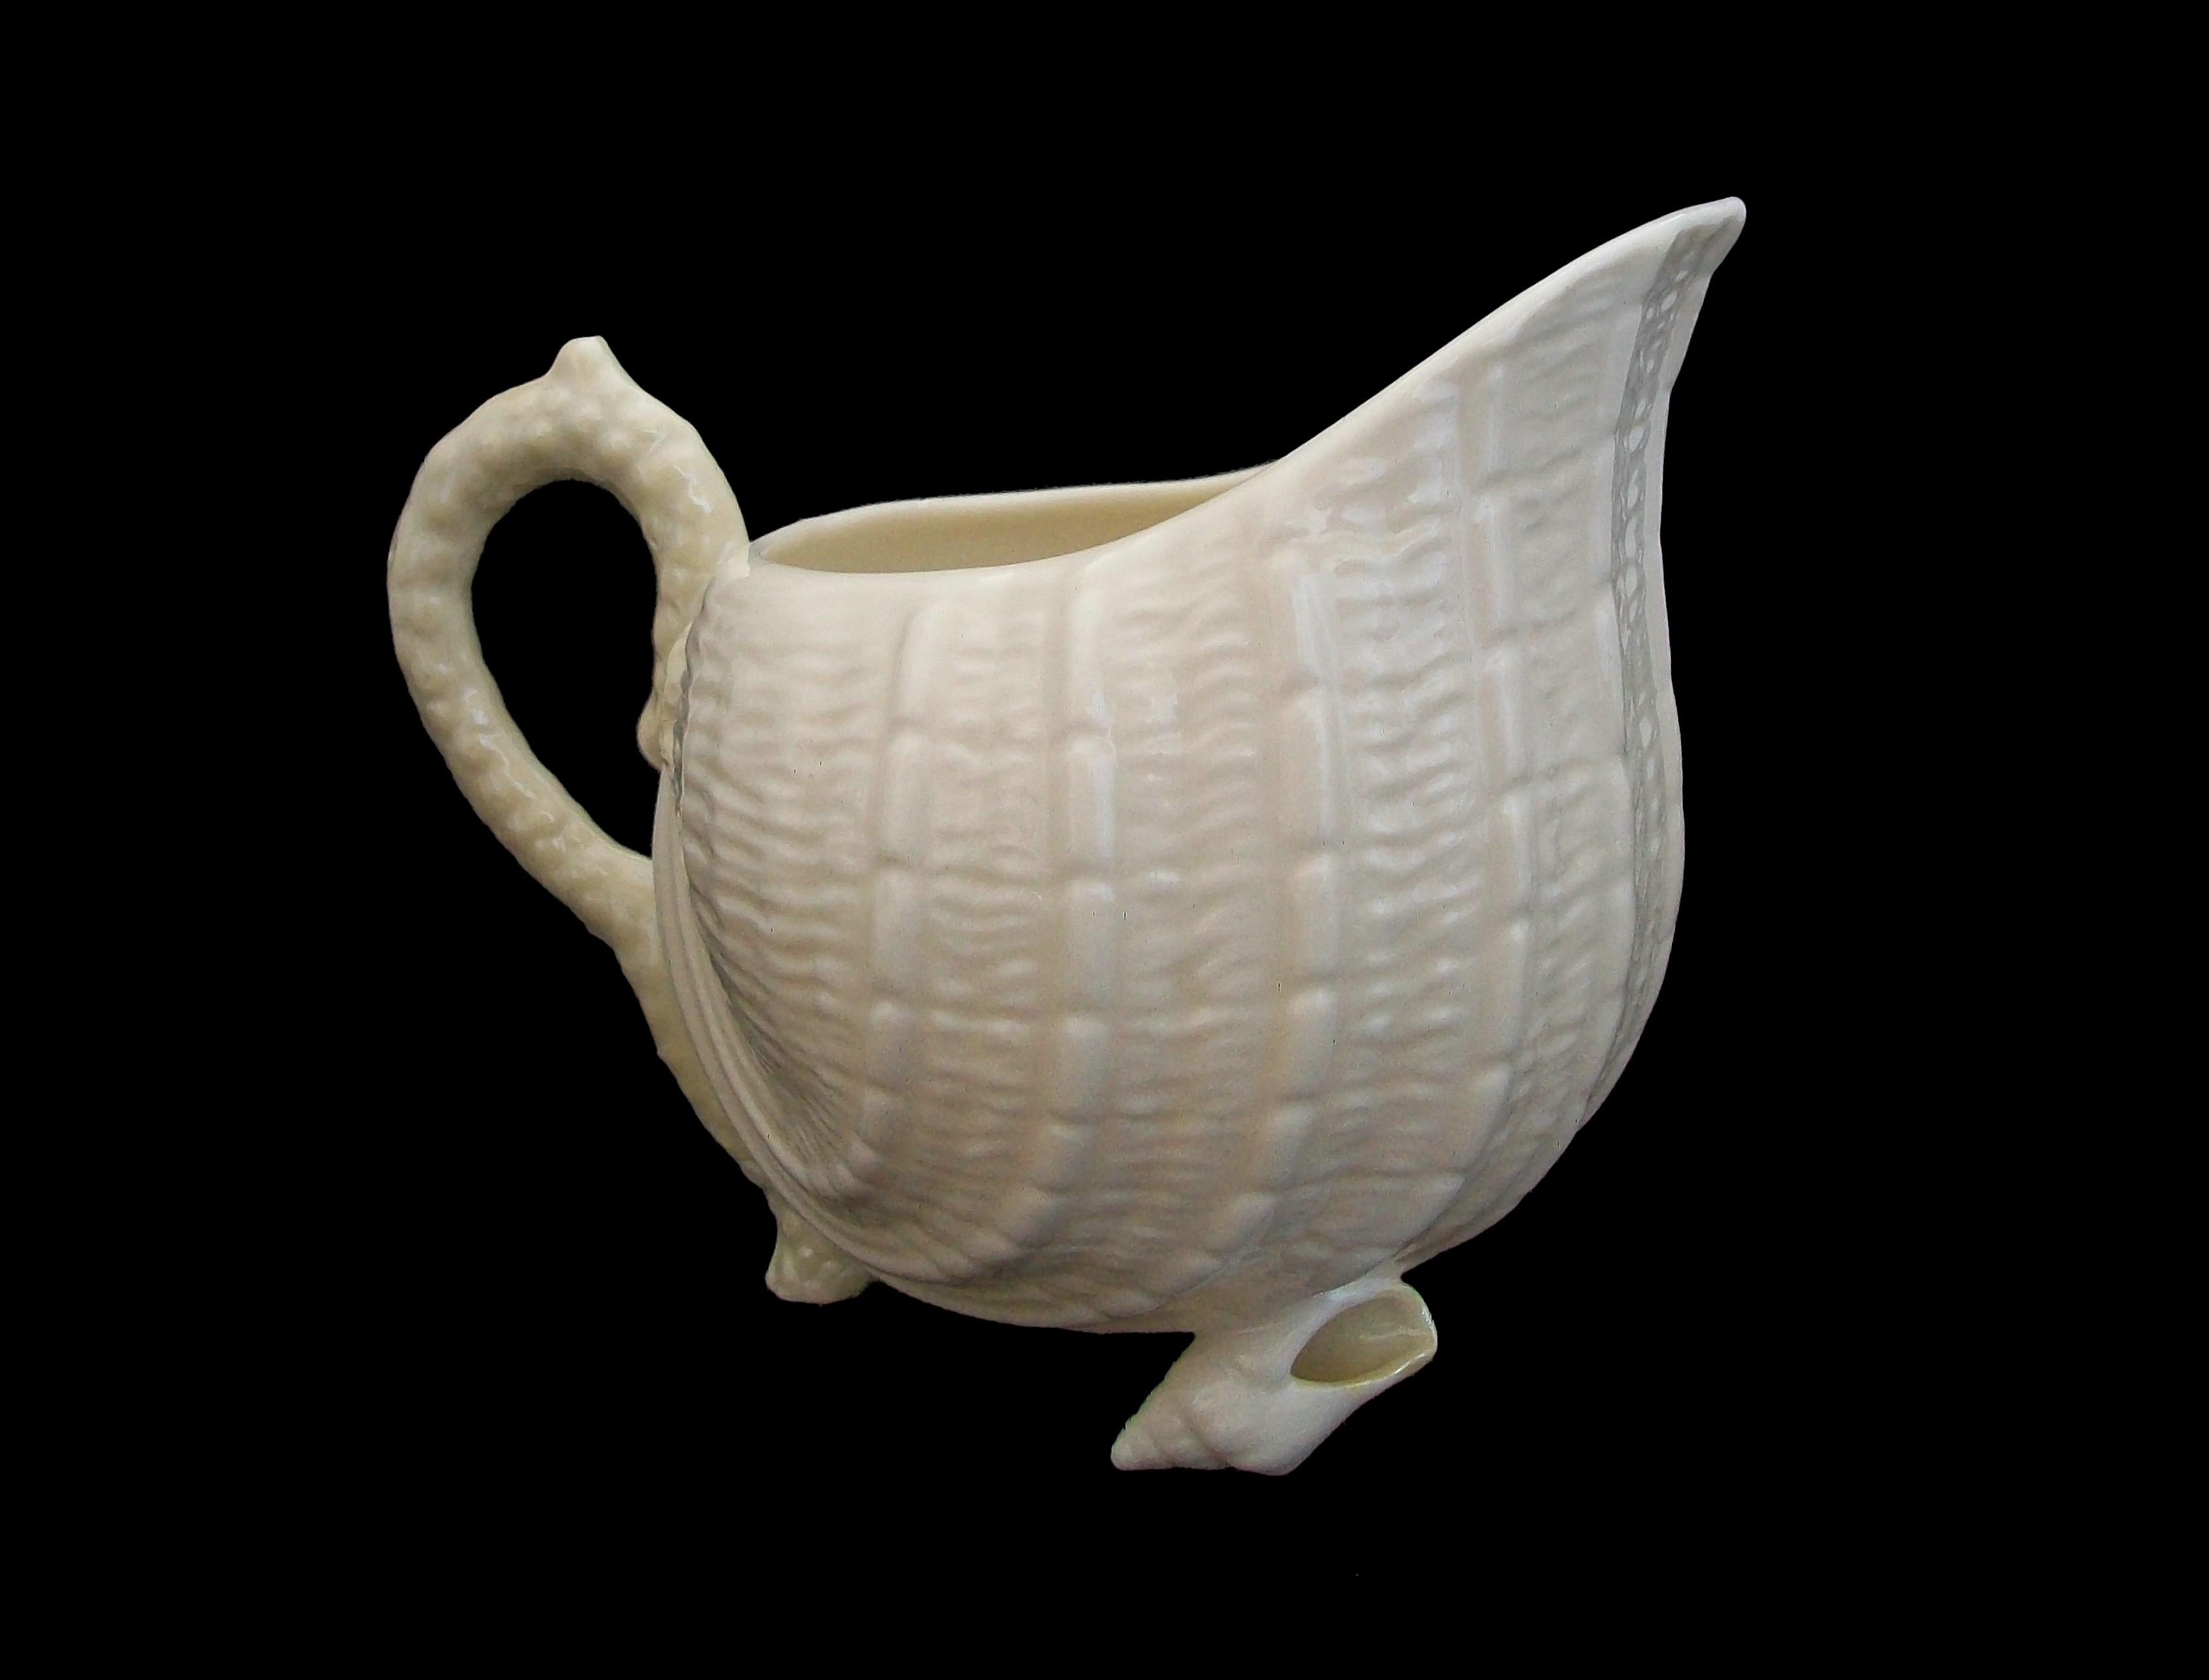 BELLEEK (Manufacturer) - ' Neptune ' (Pattern) - Vintage porcelain cream jug - large Size - featuring a yellow iridescent glaze to the handle - green maker's mark to the bottom - Ireland - circa 1965 to 1980.

Excellent/mint vintage condition -